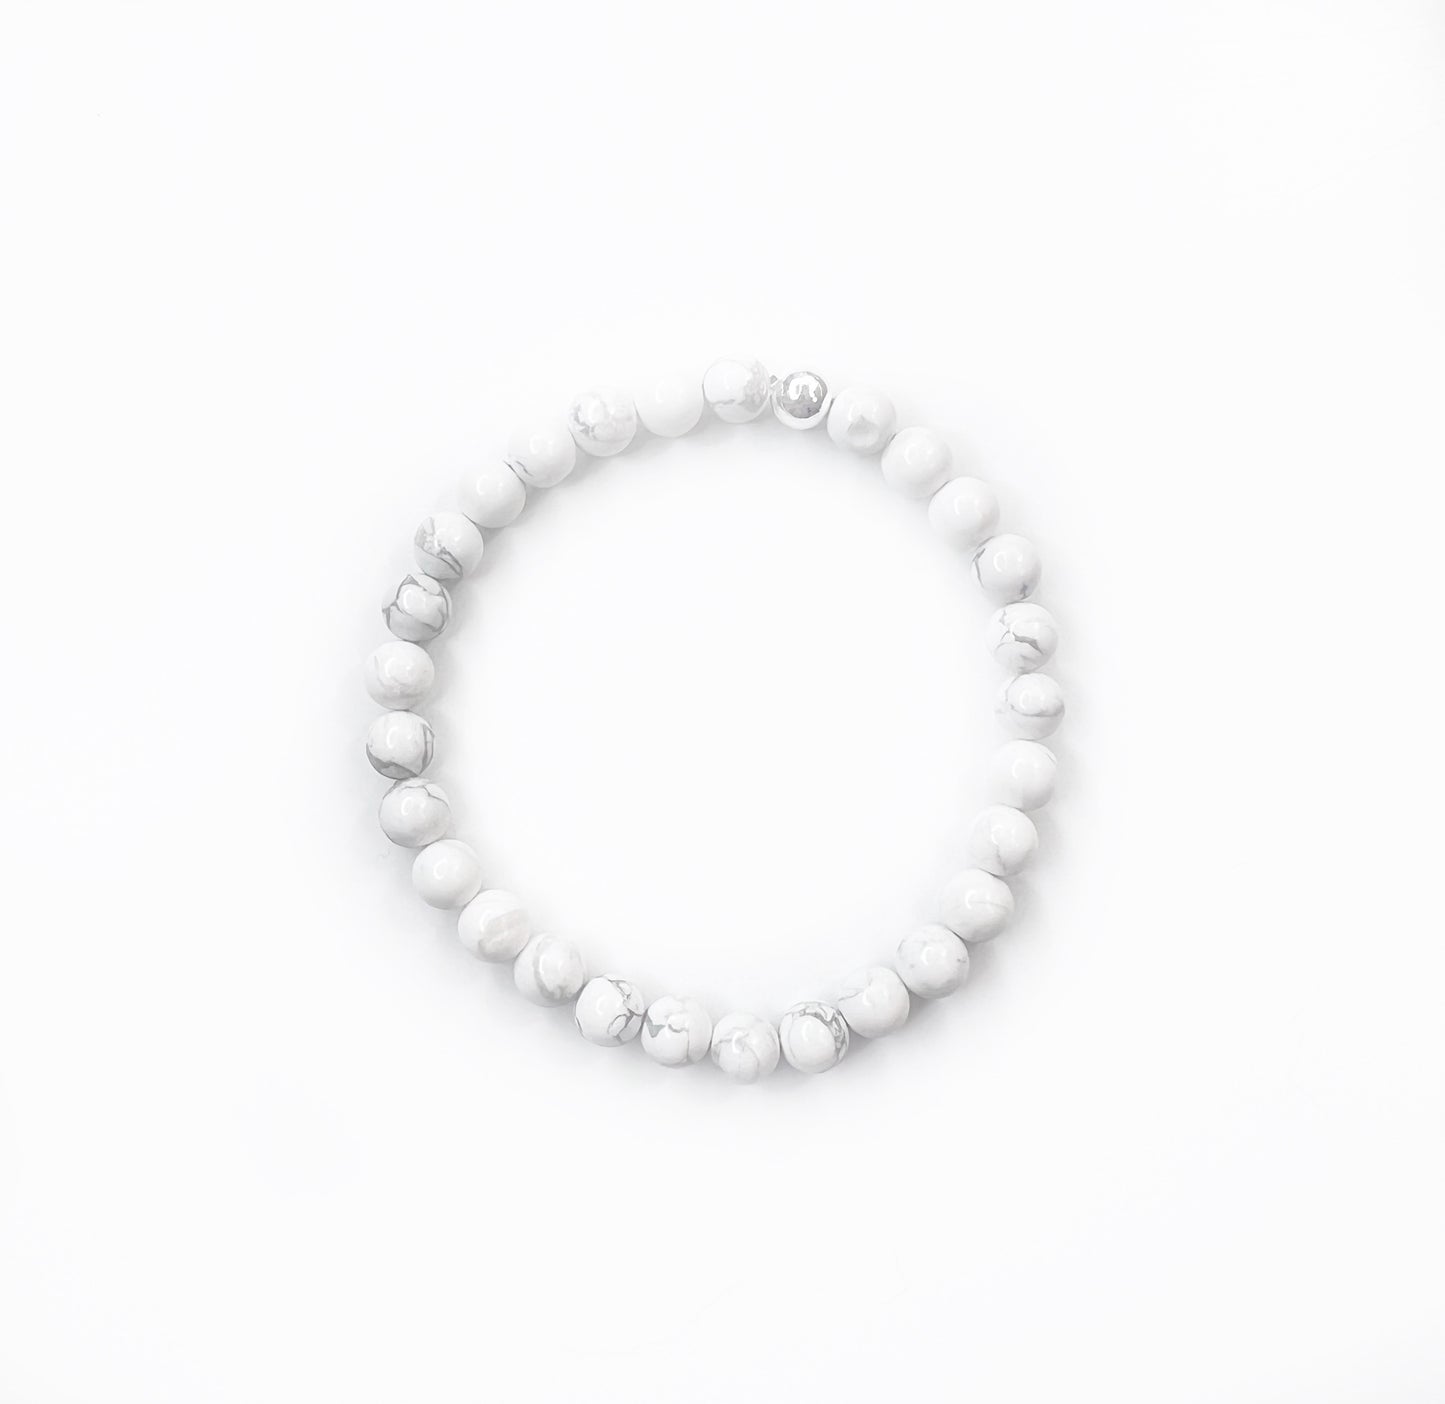 white howlite stretch bracelet with one silver bead on a white background